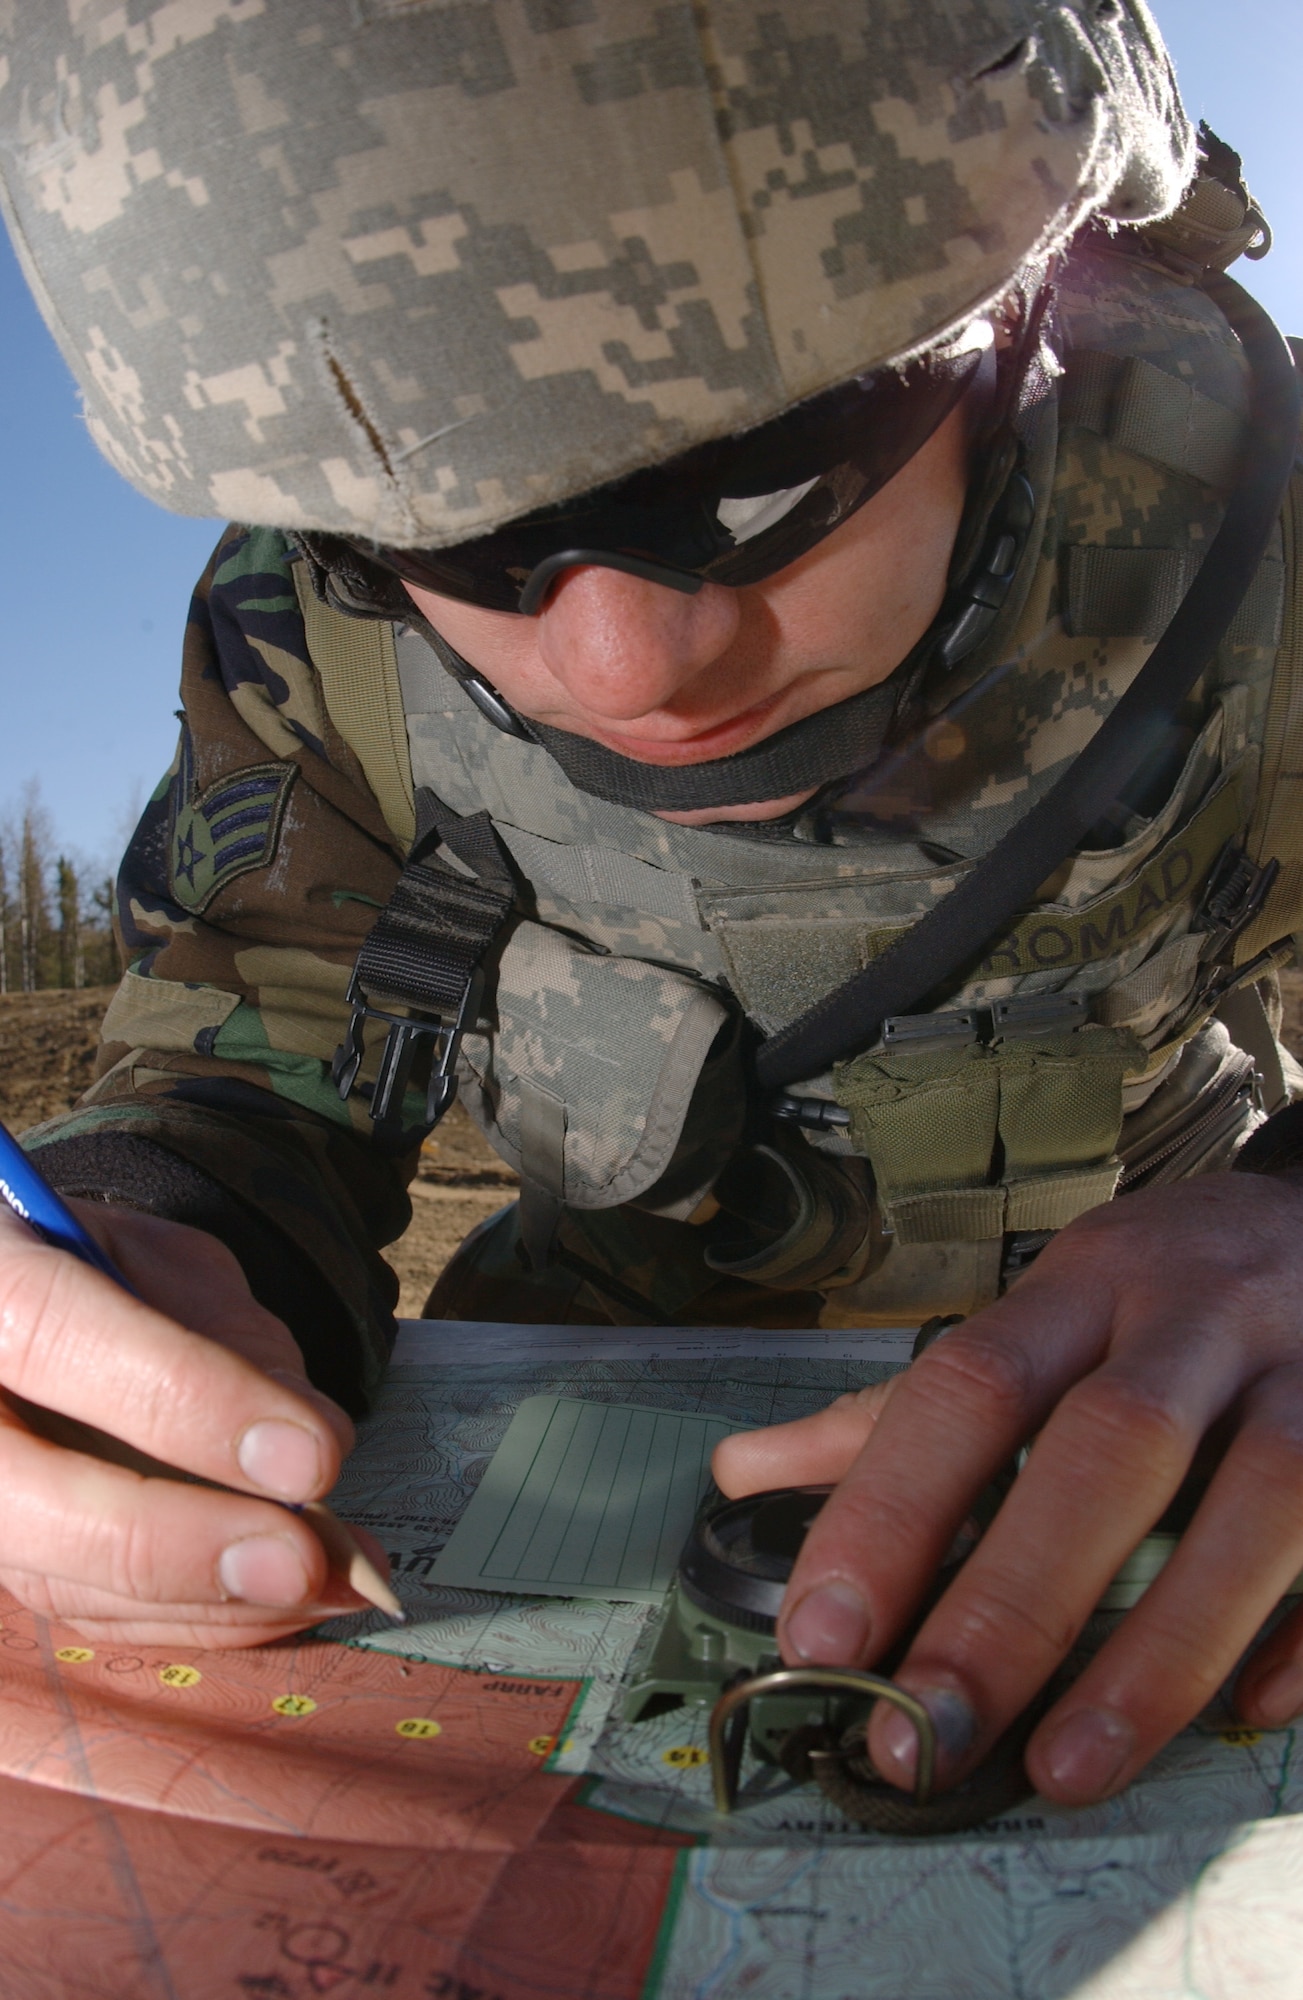 EIELSON AIR FORCE BASE, Alaska -- Senior Airman John Tranum, 3rd Air Support Operations Squadron, Tactical Air Control Party, uses a map and compass to plan his course for the vehicle navigation exercise during Operation URSA Minor May 16 on the Pacific Alaska Range Complex. The 3rd ASOS, equips, and maintains mission-ready air liaison, terminal attack control, and weather observation/forecasting elements to support the U.S. Army Alaska 1st Stryker Brigade Combat Team. (U.S. Air Force Photo by Airman 1st Class Jonathan Snyder) 